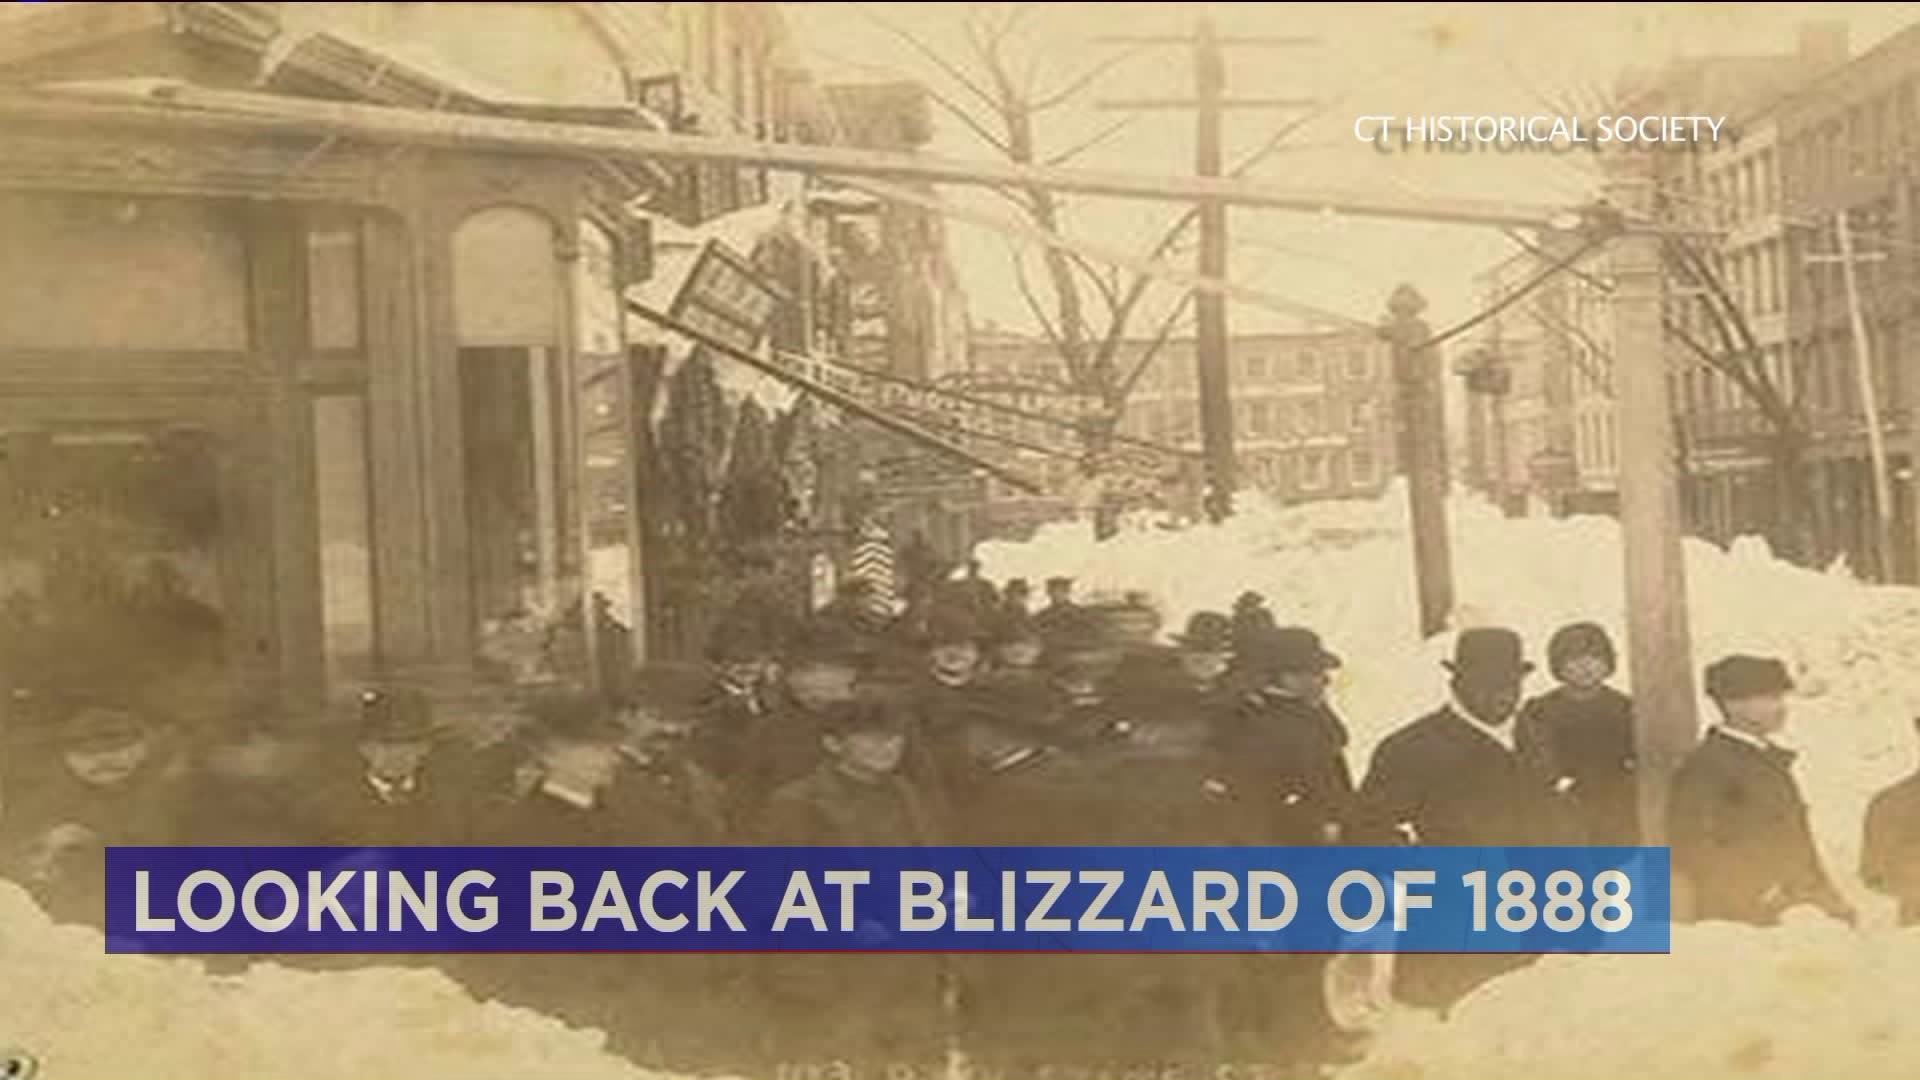 Looking back at the blizzard in March 1888